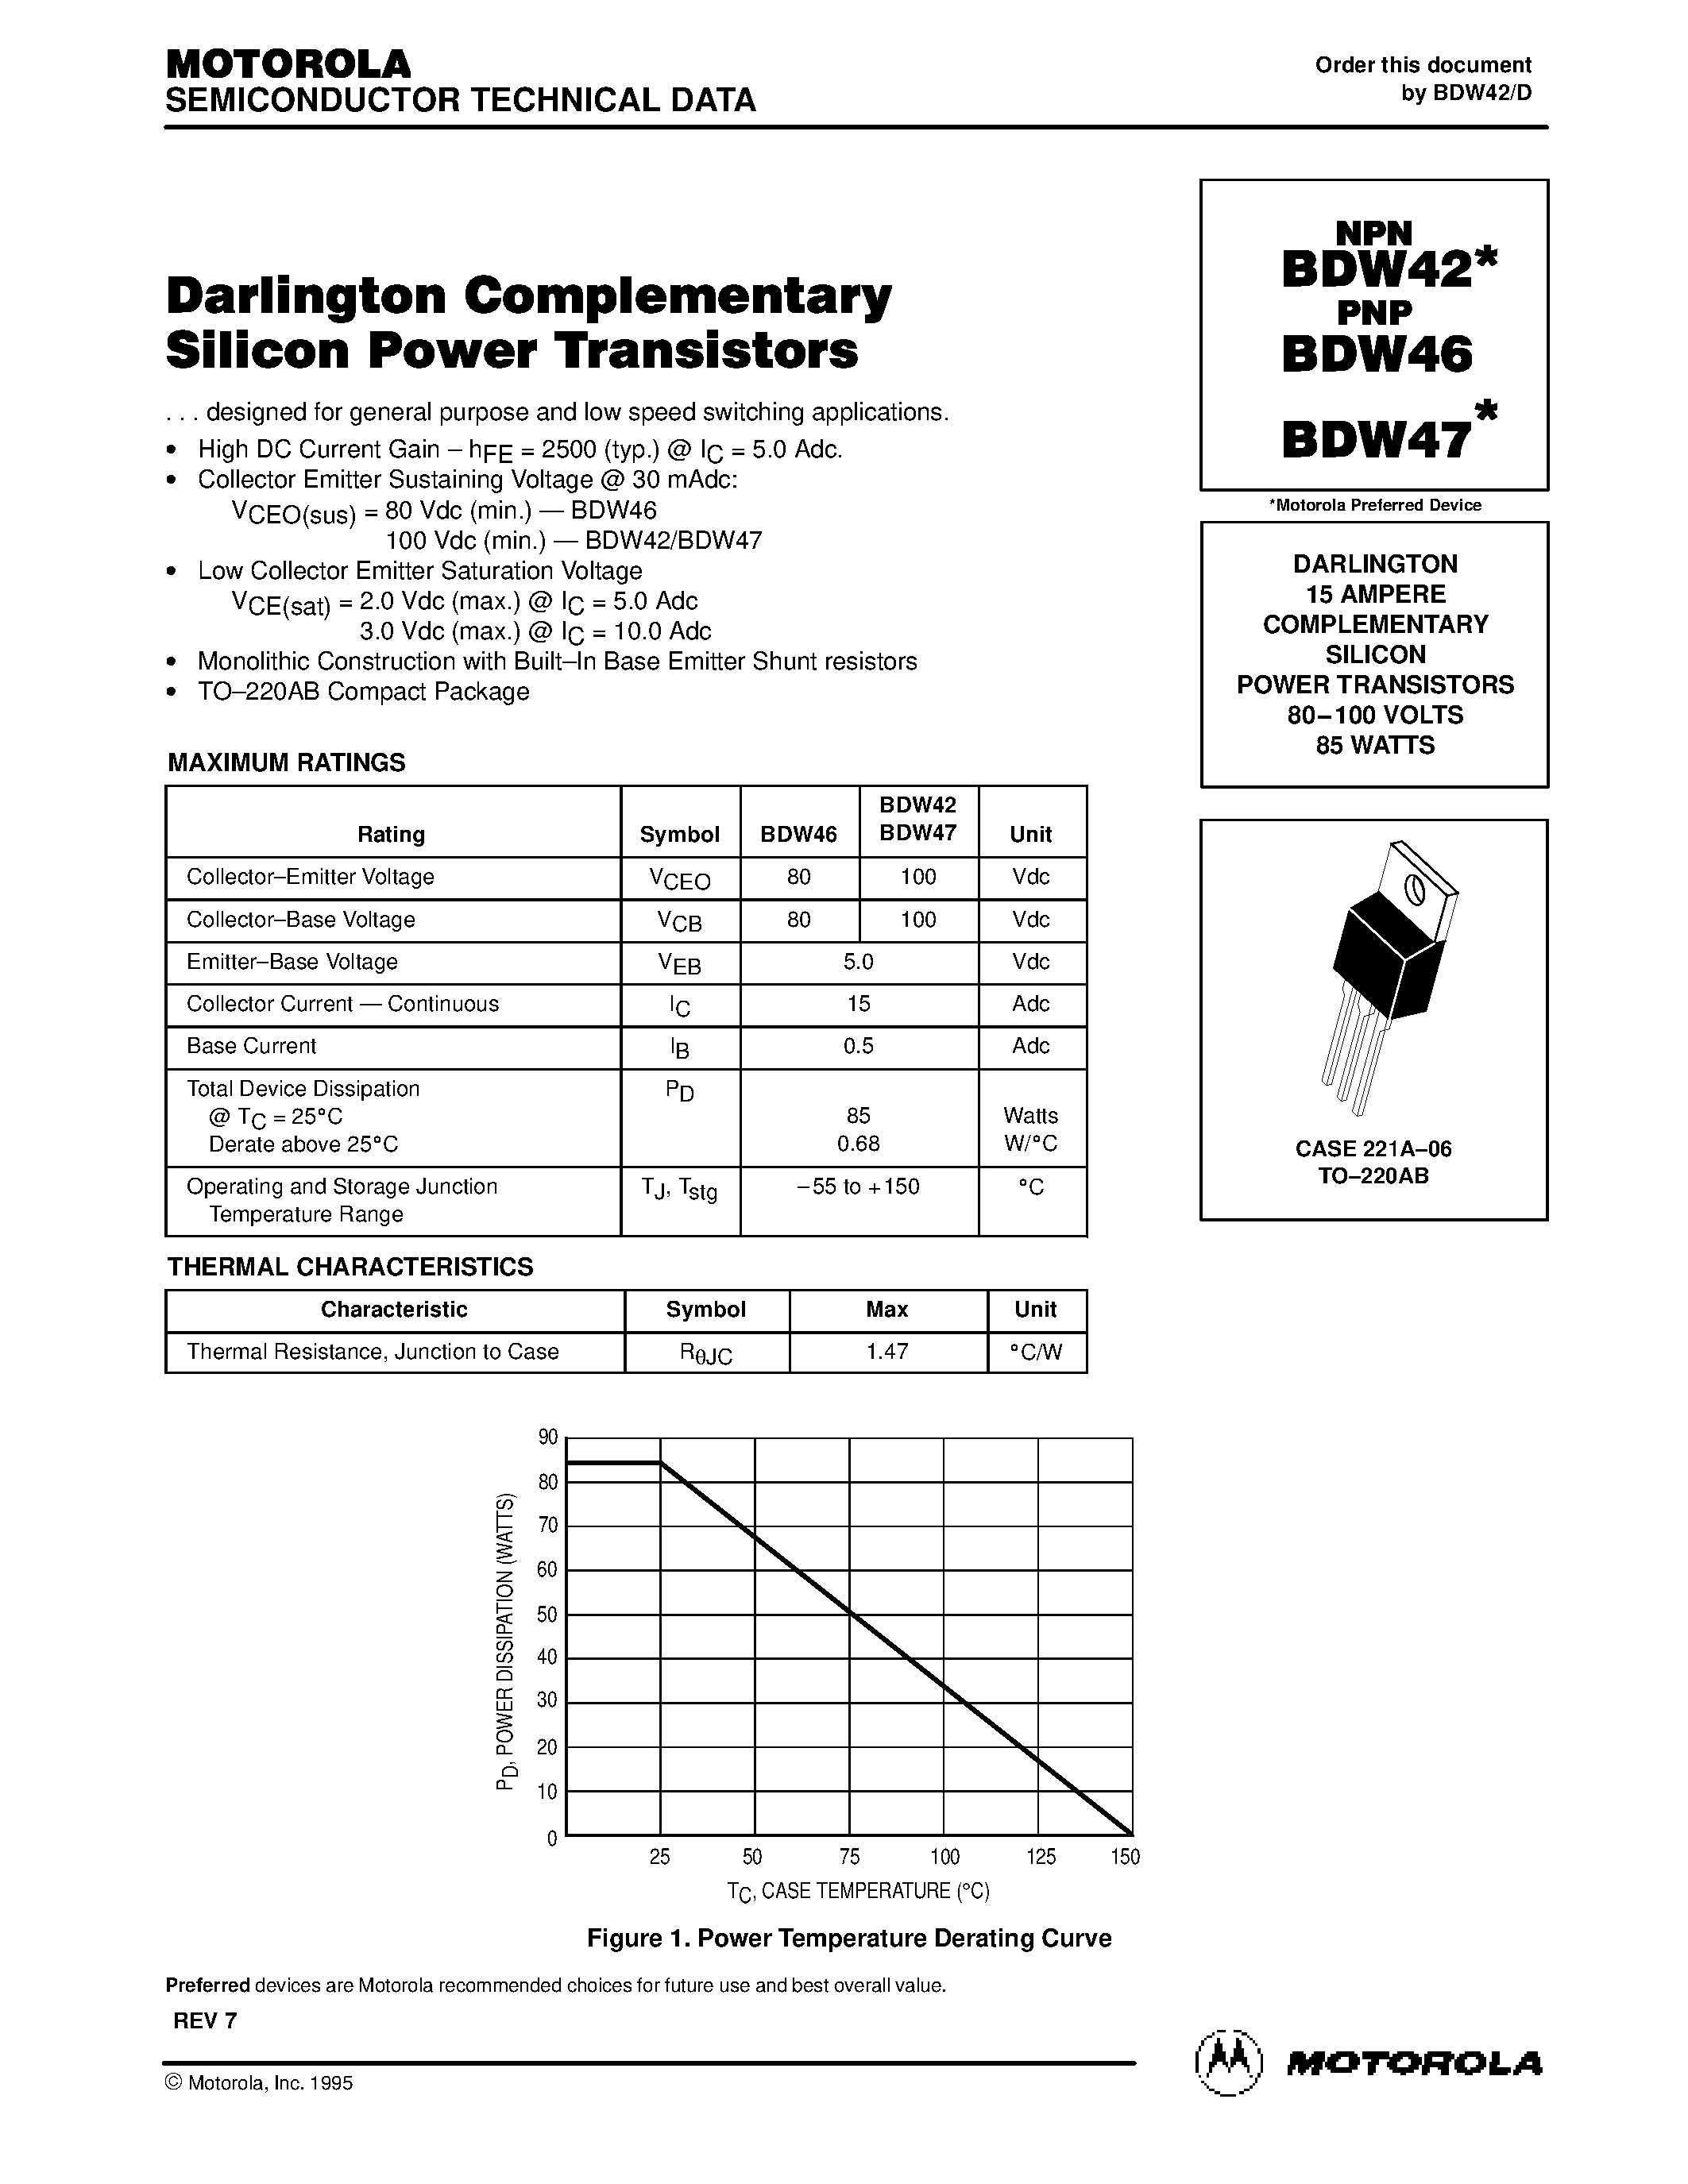 Даташит BDW46 - Darlington Complementary Silicon Power Transistors страница 1